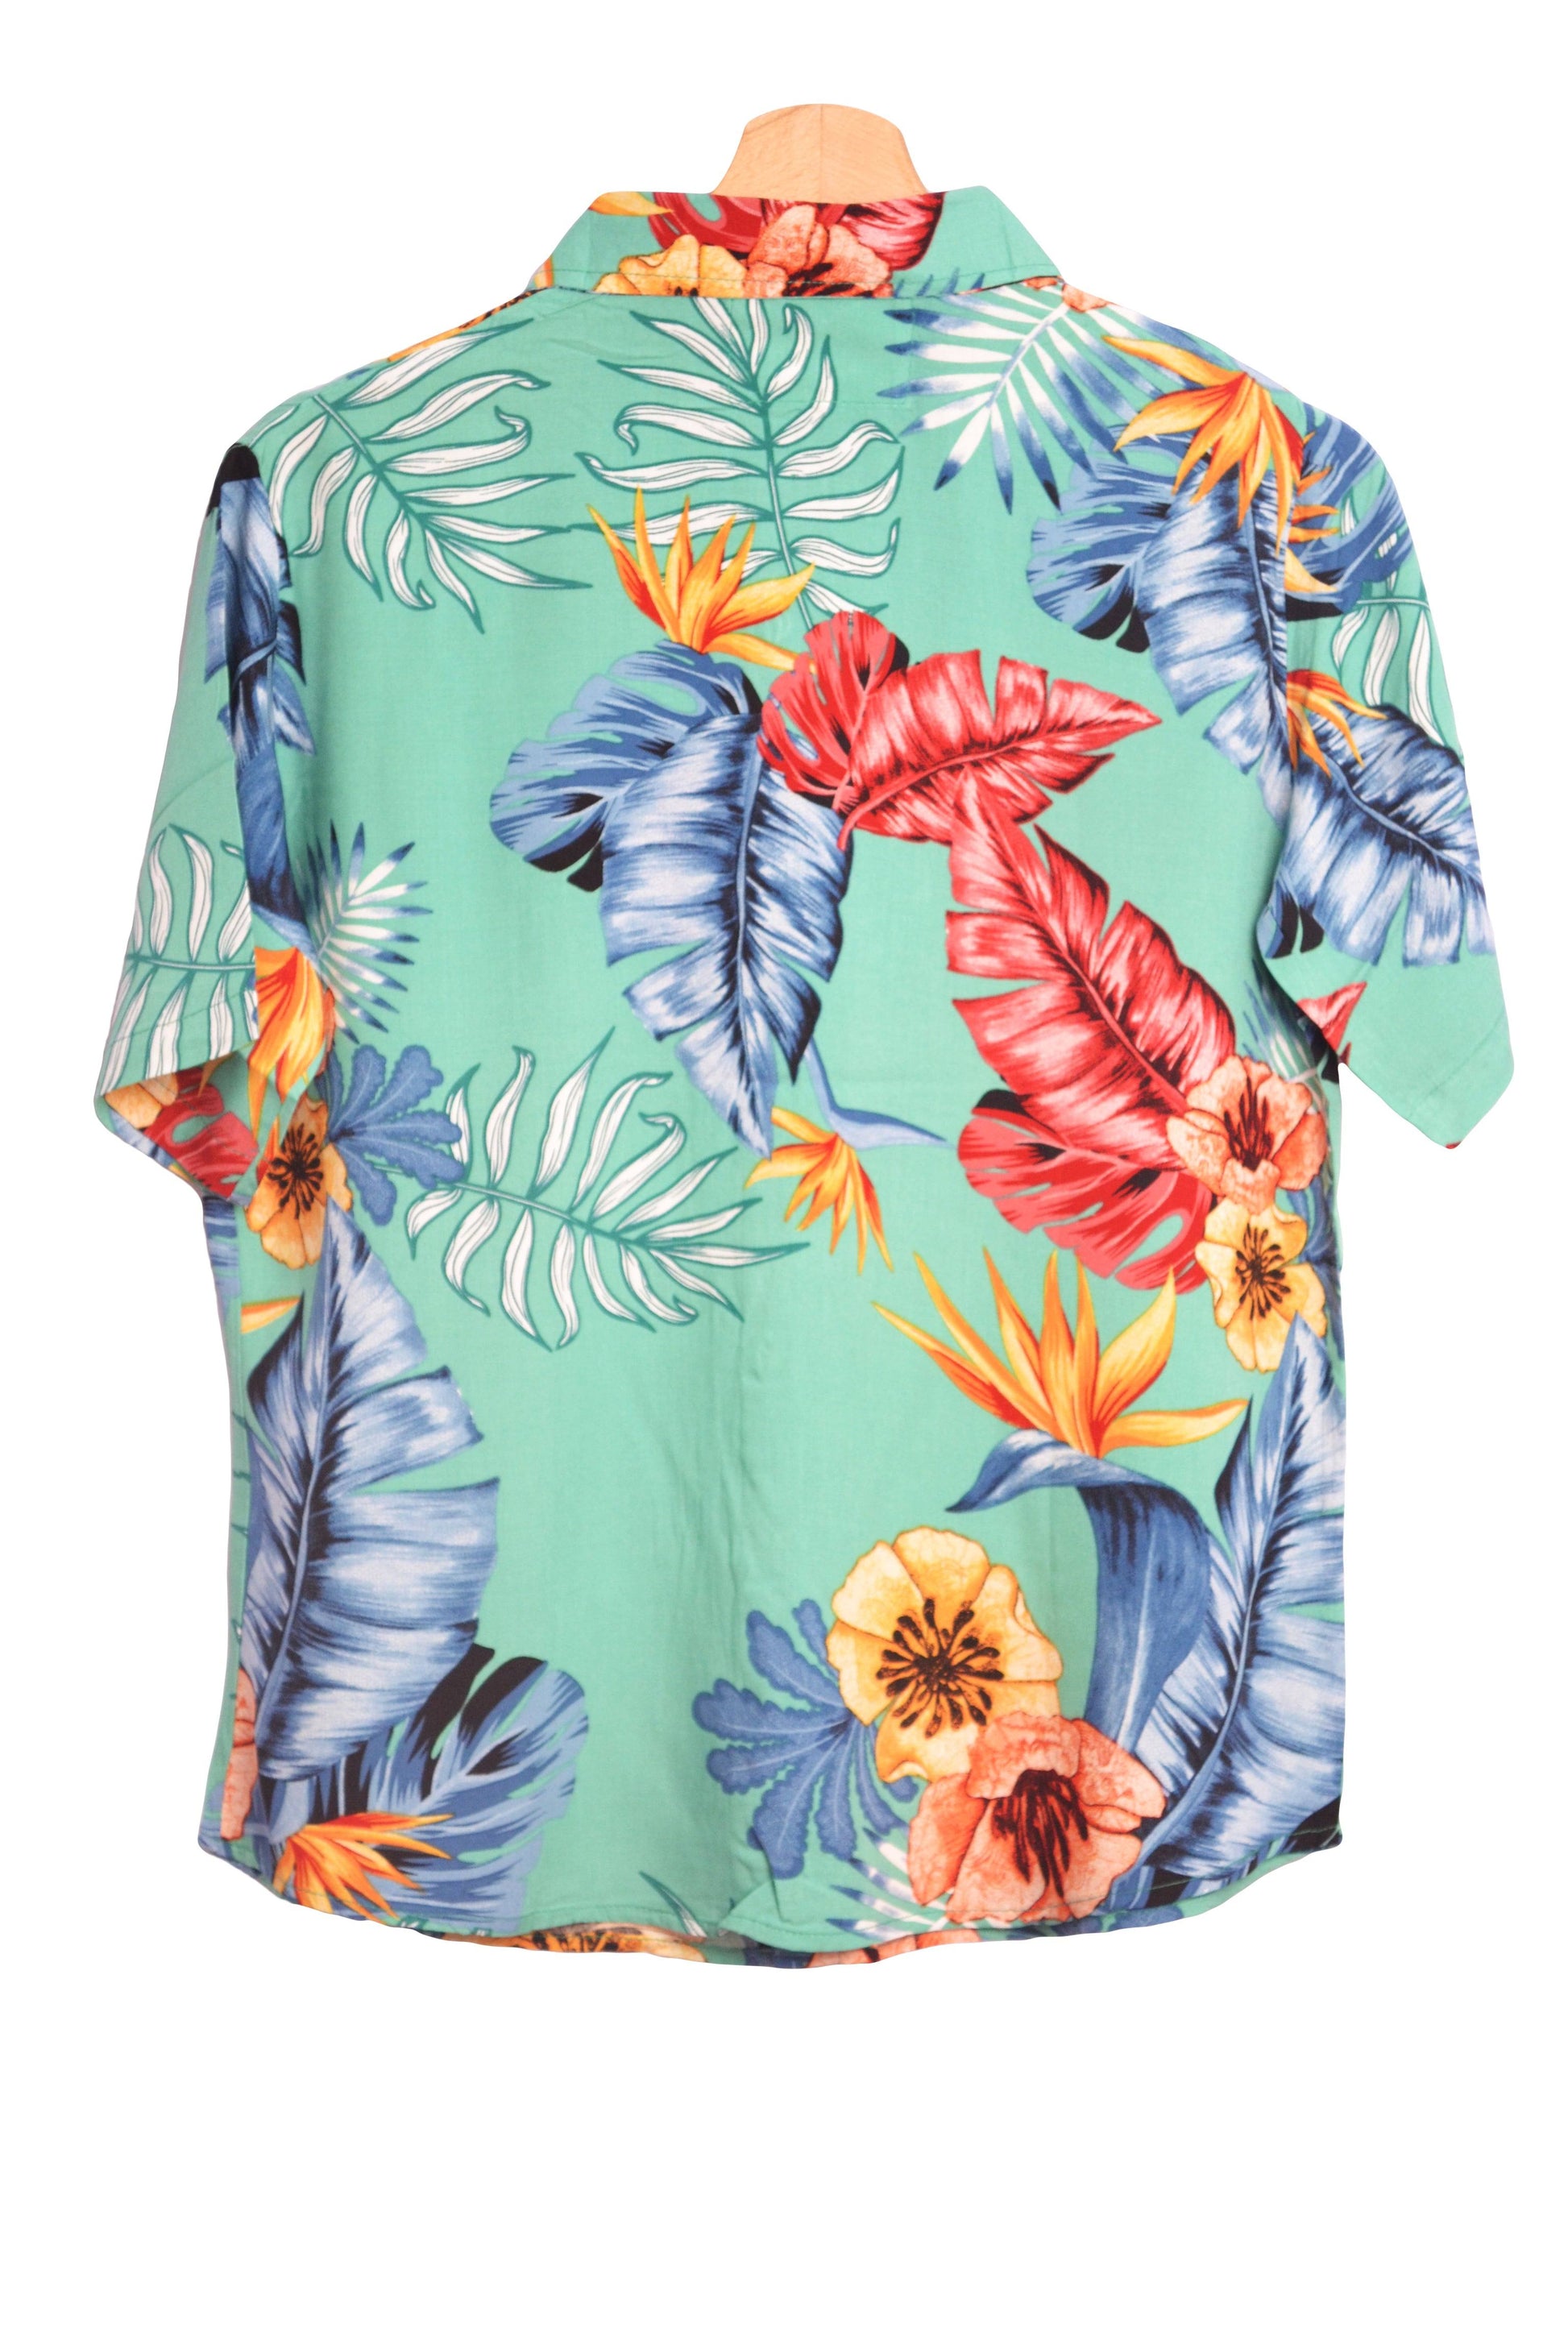 Vue dos chemisier up hawaii couleur turquoise - GL BOUTIK